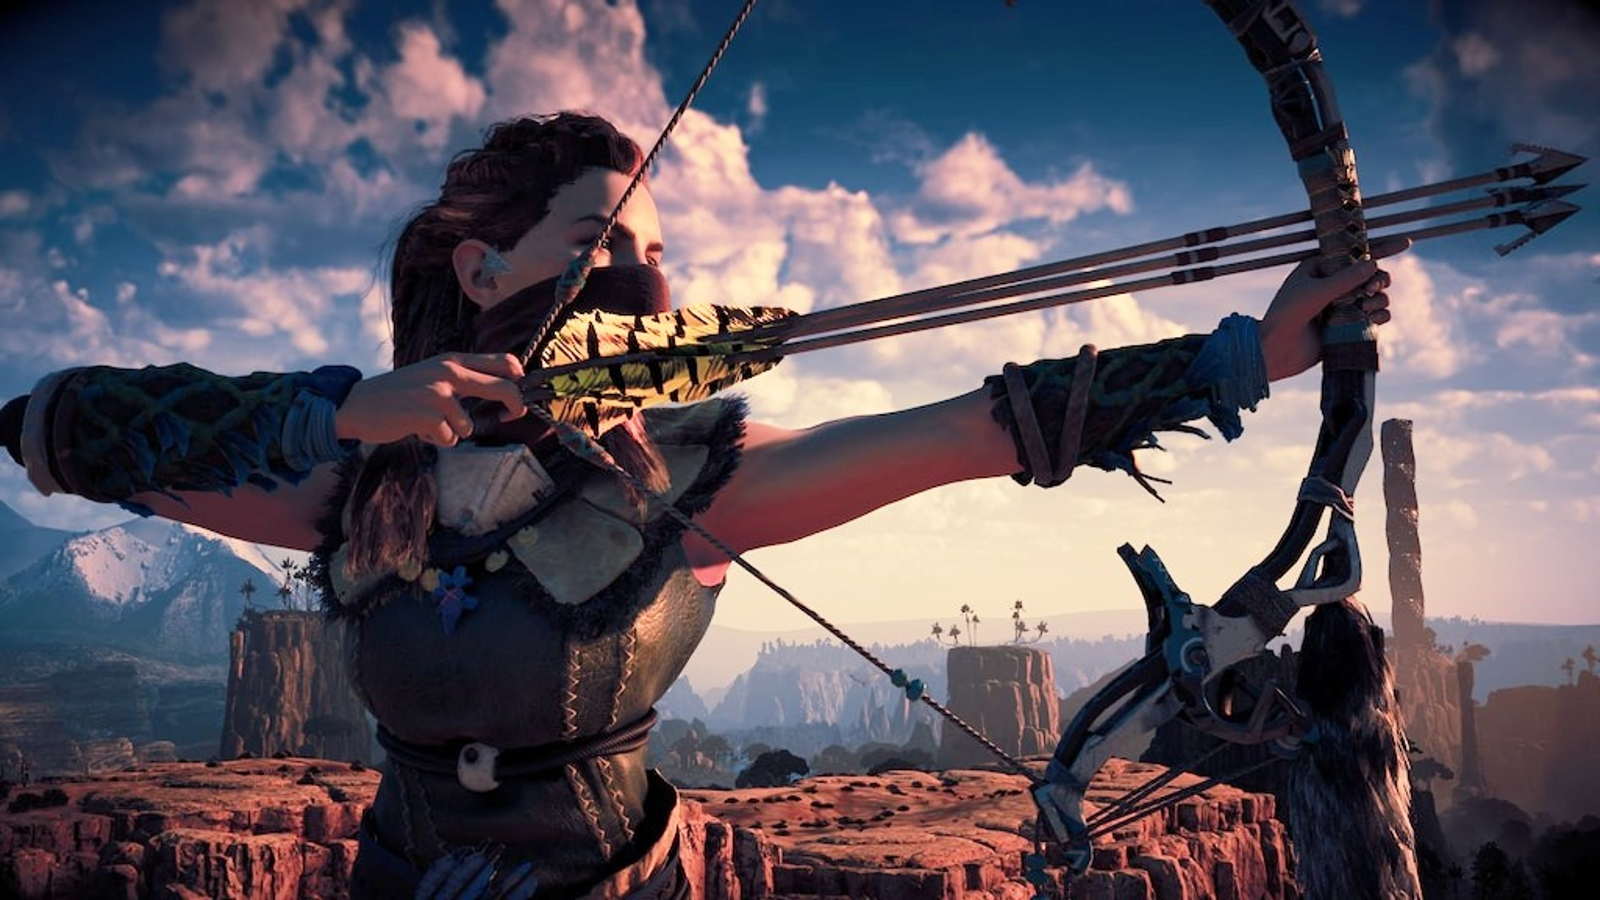 Rumour: Horizon Zero Dawn 2 Initially Planned for PS4 Before